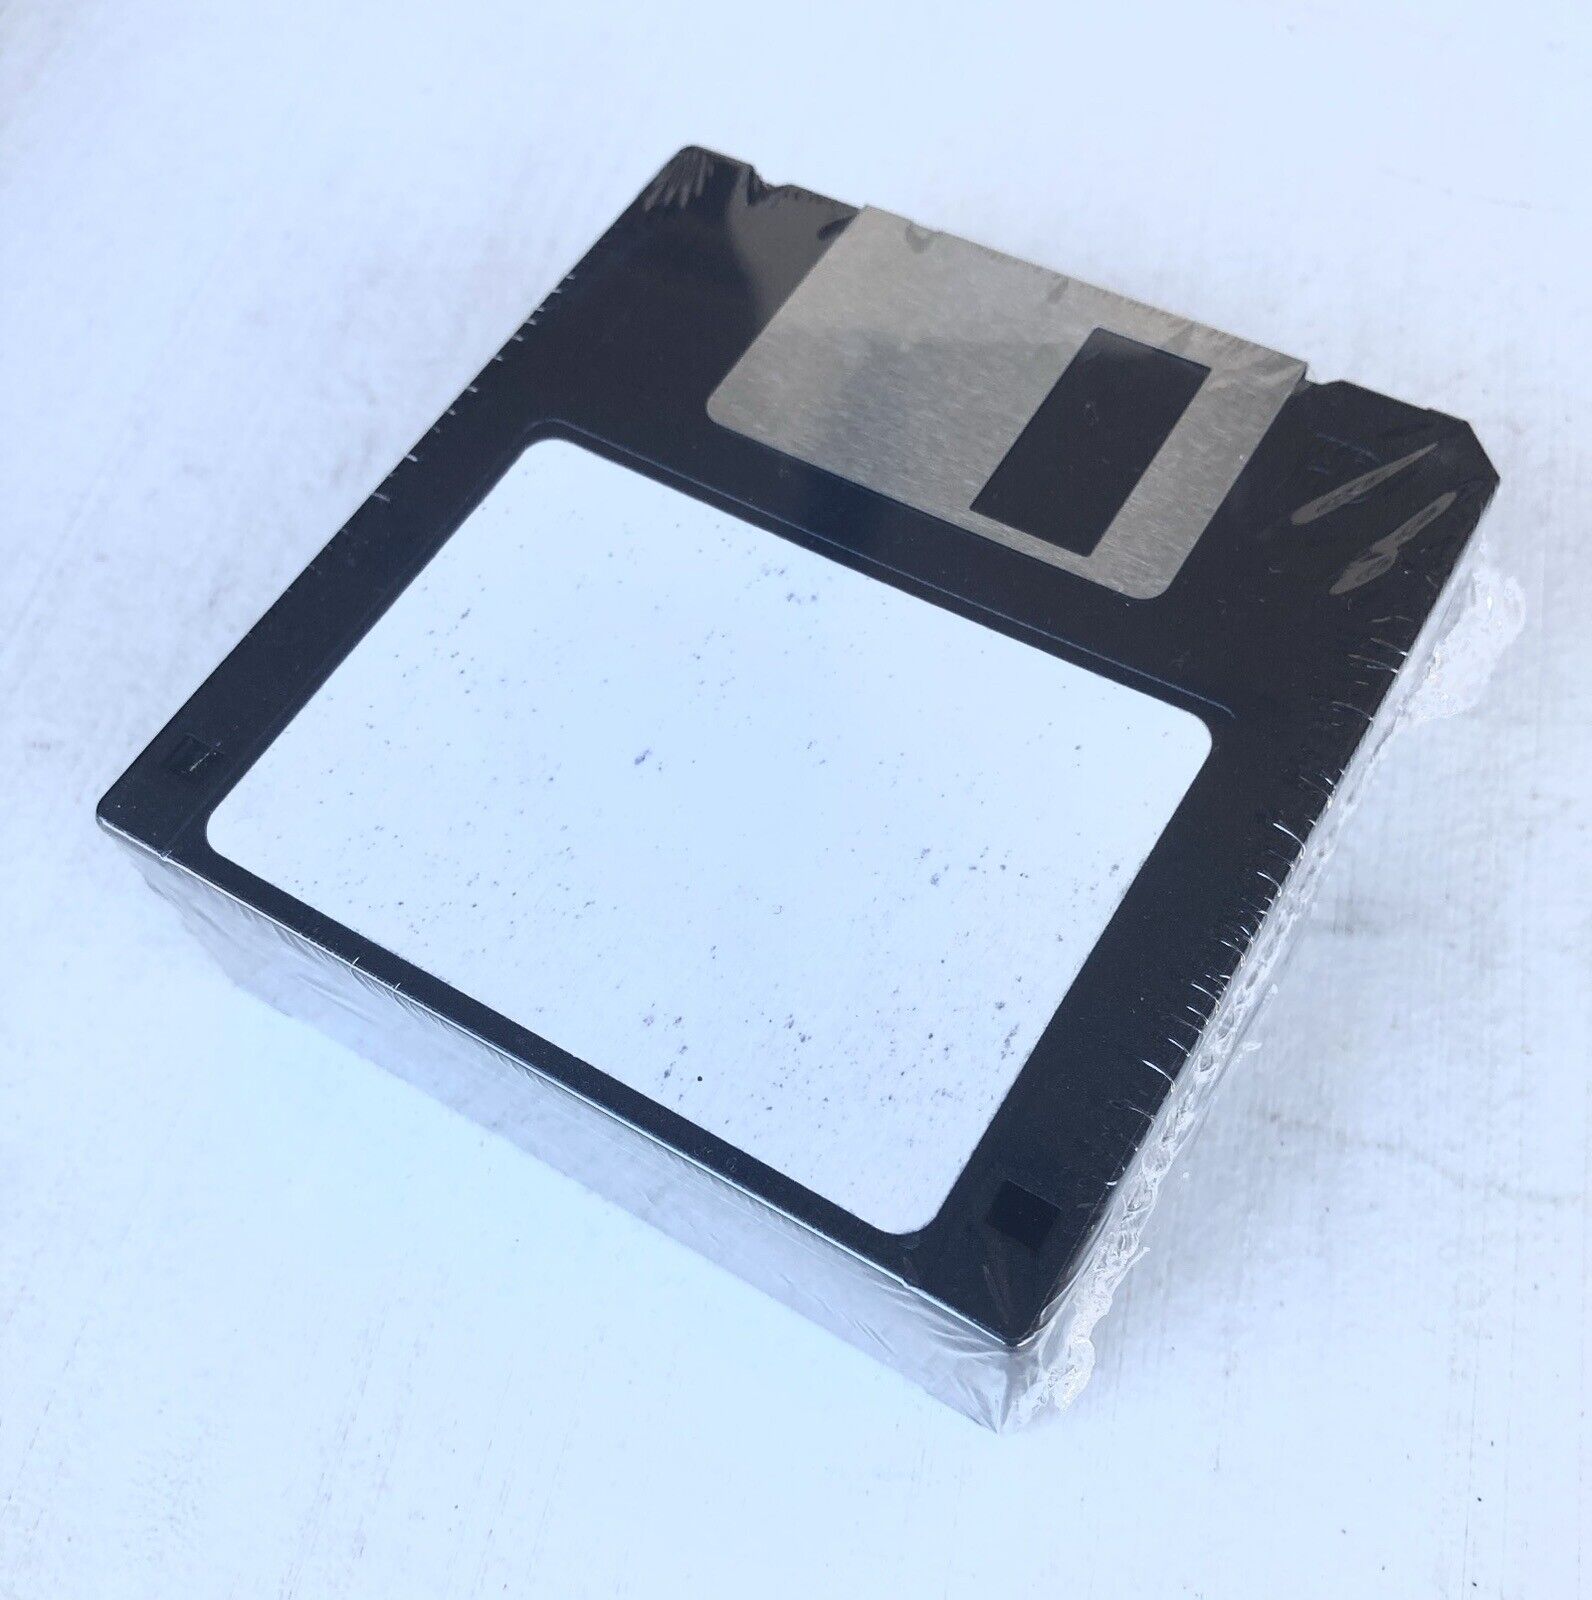 Generic 3.5” Floppy Disks - Pack Of 10 Pack - New 1.44 MB Old Stock